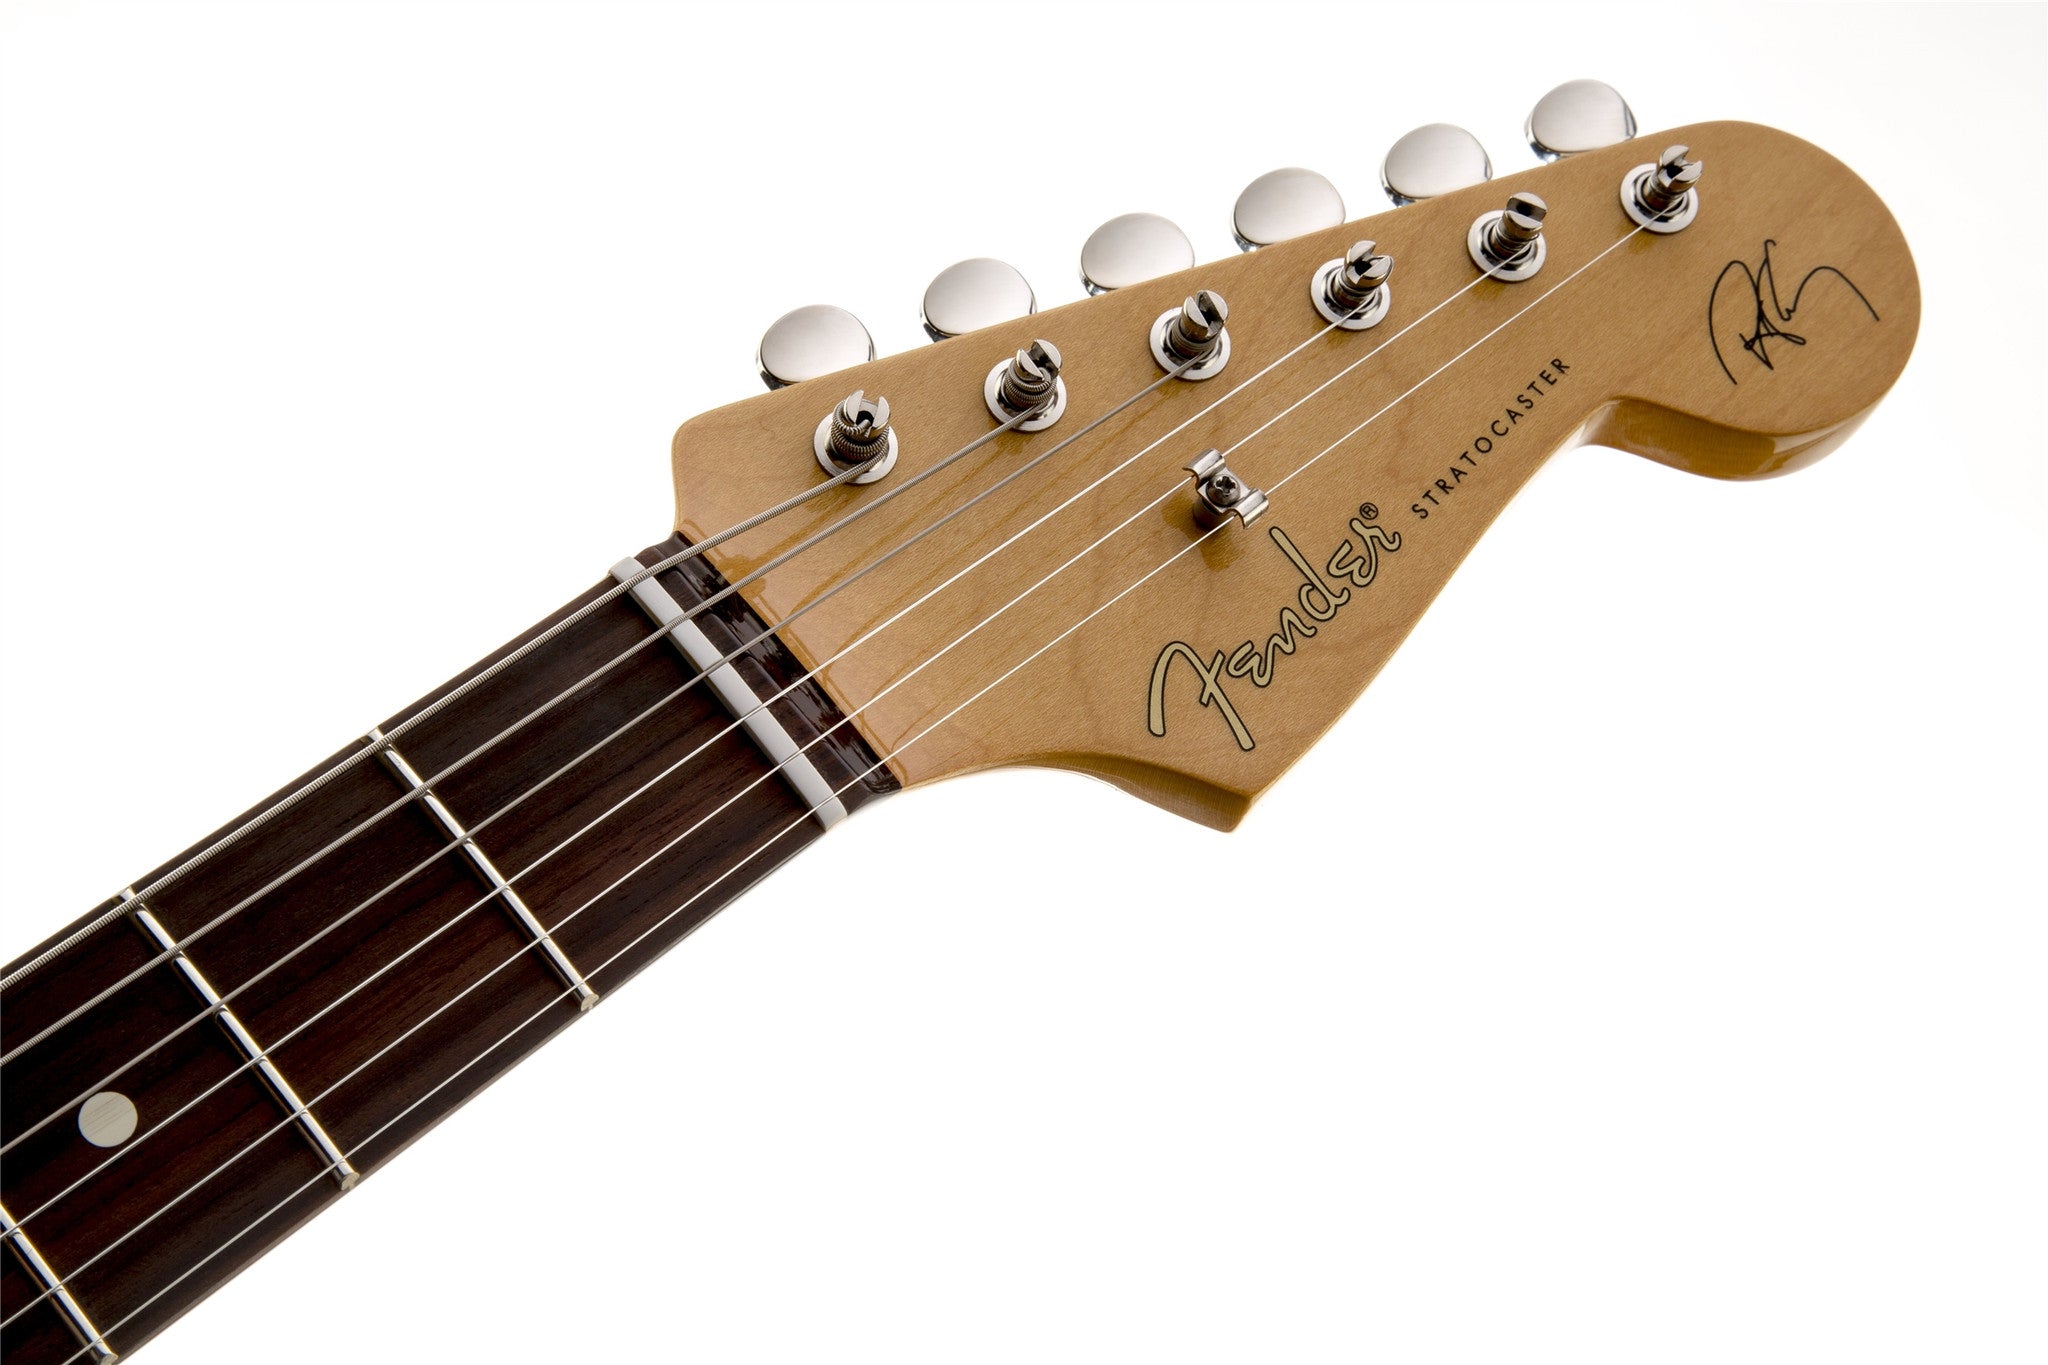 Fender Robert Cray Stratocaster®, Rosewood Fingerboard, 3-Color Sunburst 0139100300 - L.A. Music - Canada's Favourite Music Store!